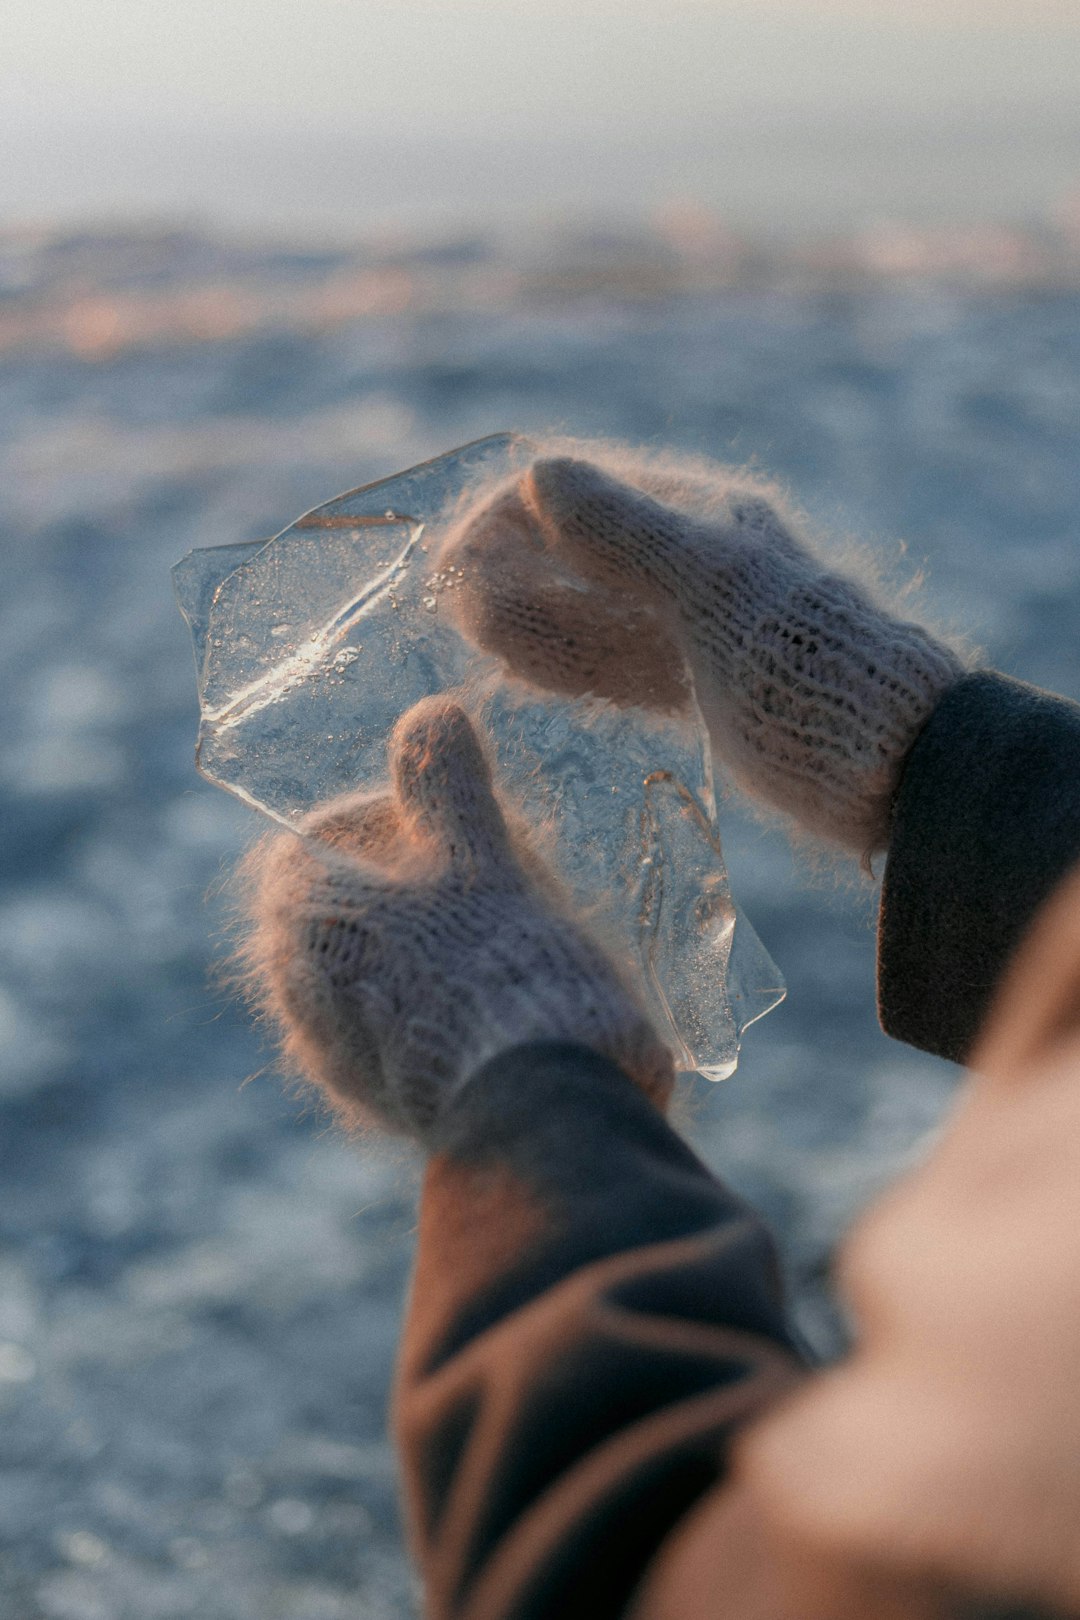 person in gray gloves holding clear plastic bag